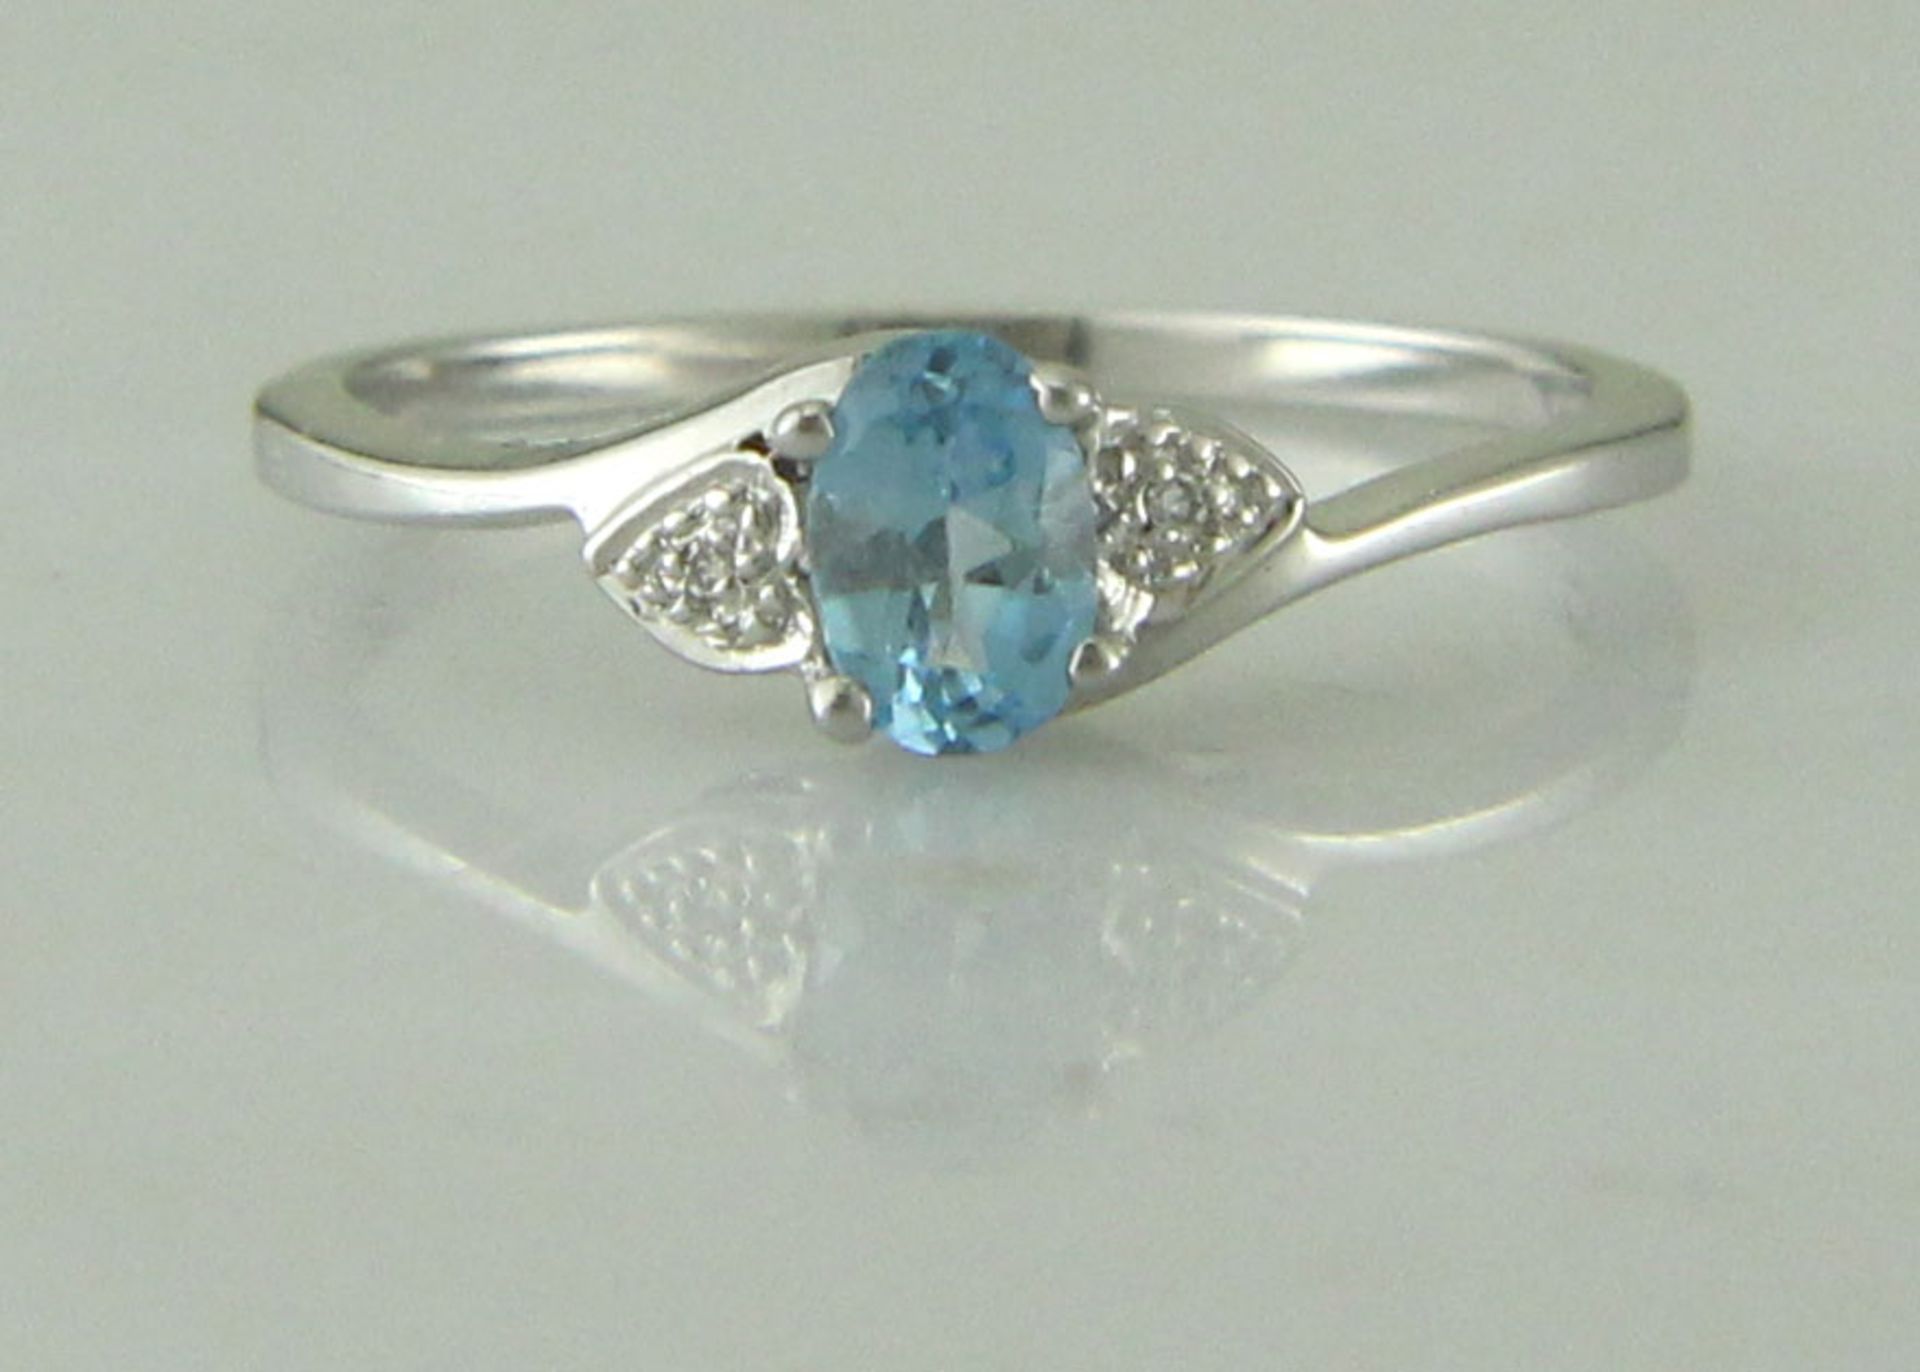 9ct White Gold Fancy Cluster Diamond Blue Topaz Ring 0.01 Carats - Valued by GIE £860.00 - 9ct White - Image 5 of 6